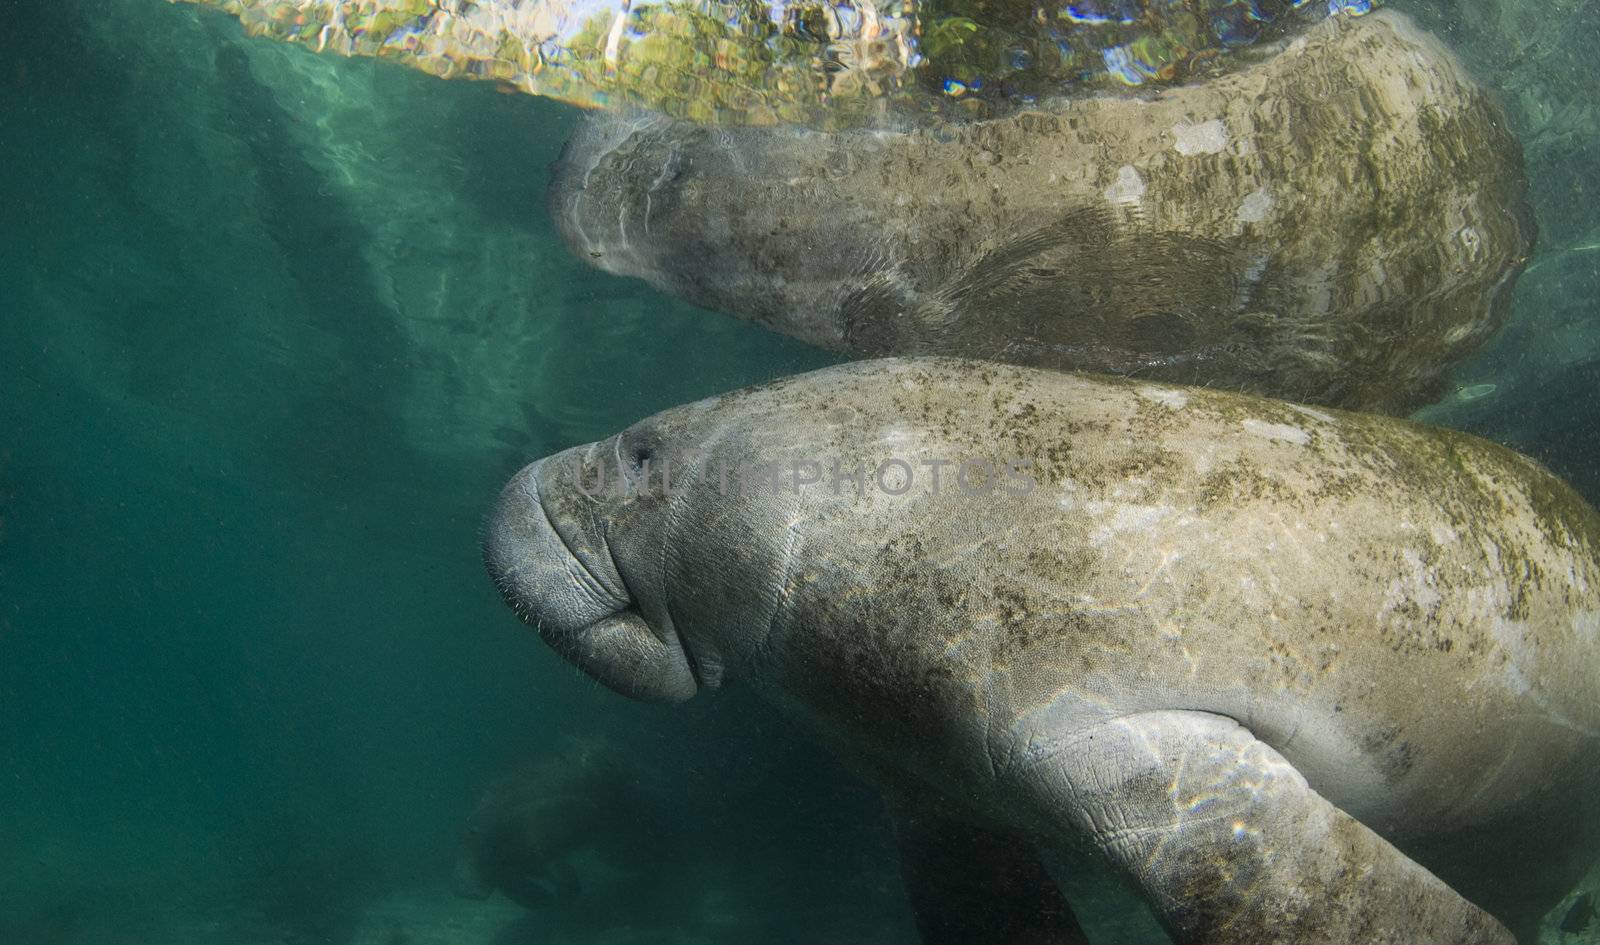 A Florida manatee (Trichechus manatus latirostrus) reflects off the surface of the placid water in the springs of Crystal River, Florida.